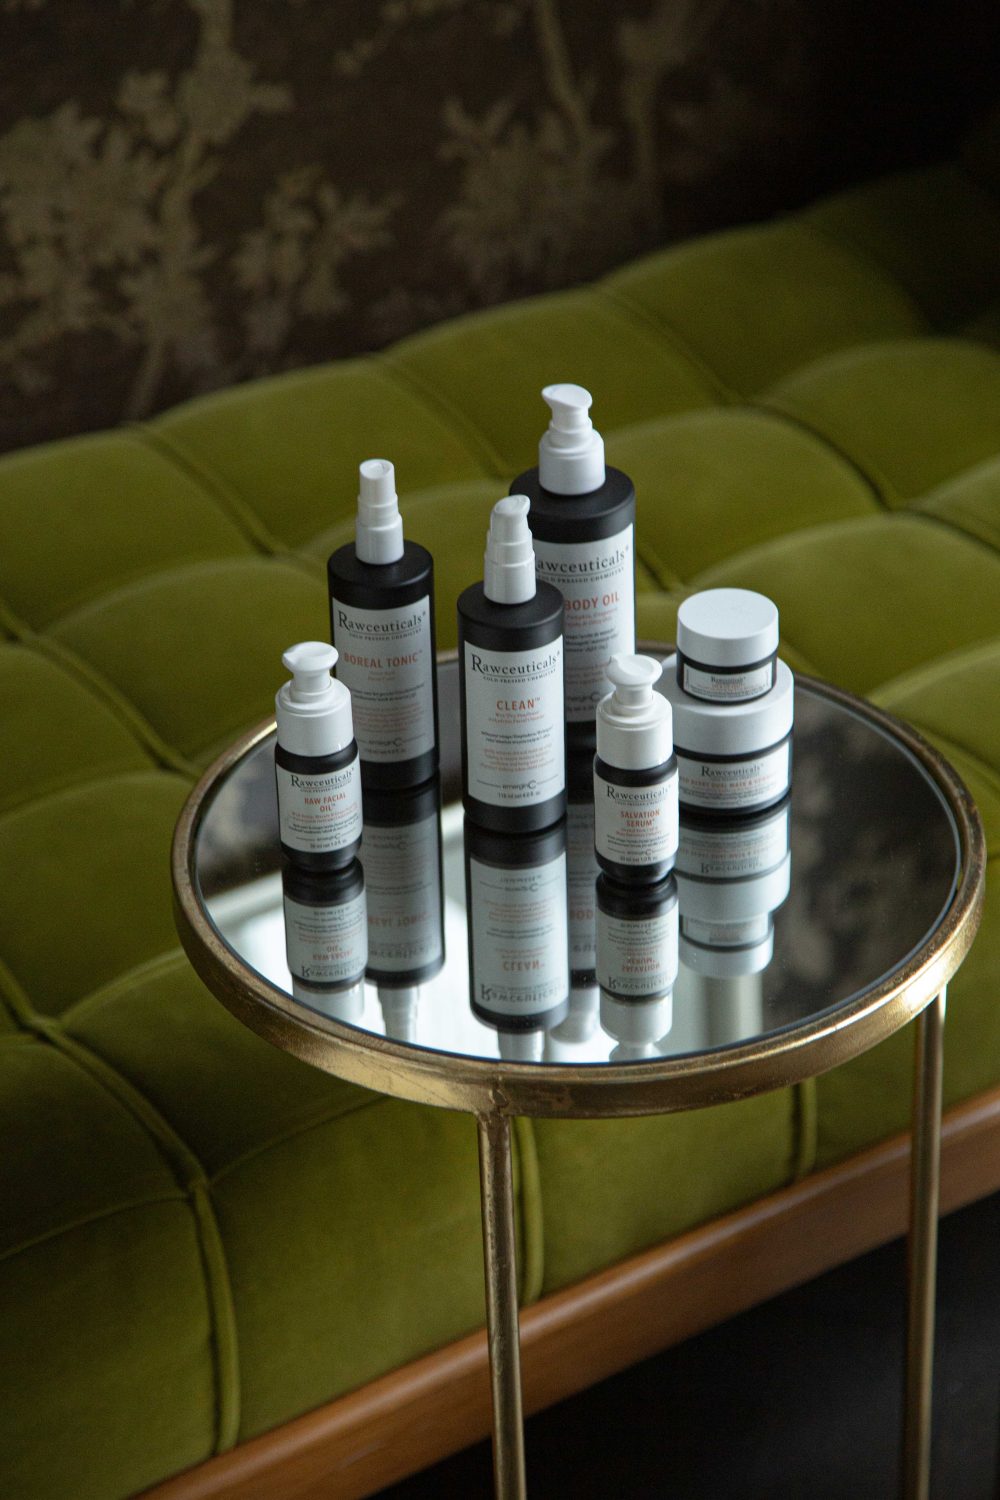 All emerginC Rawceuticals products on table next to green velvet sofa